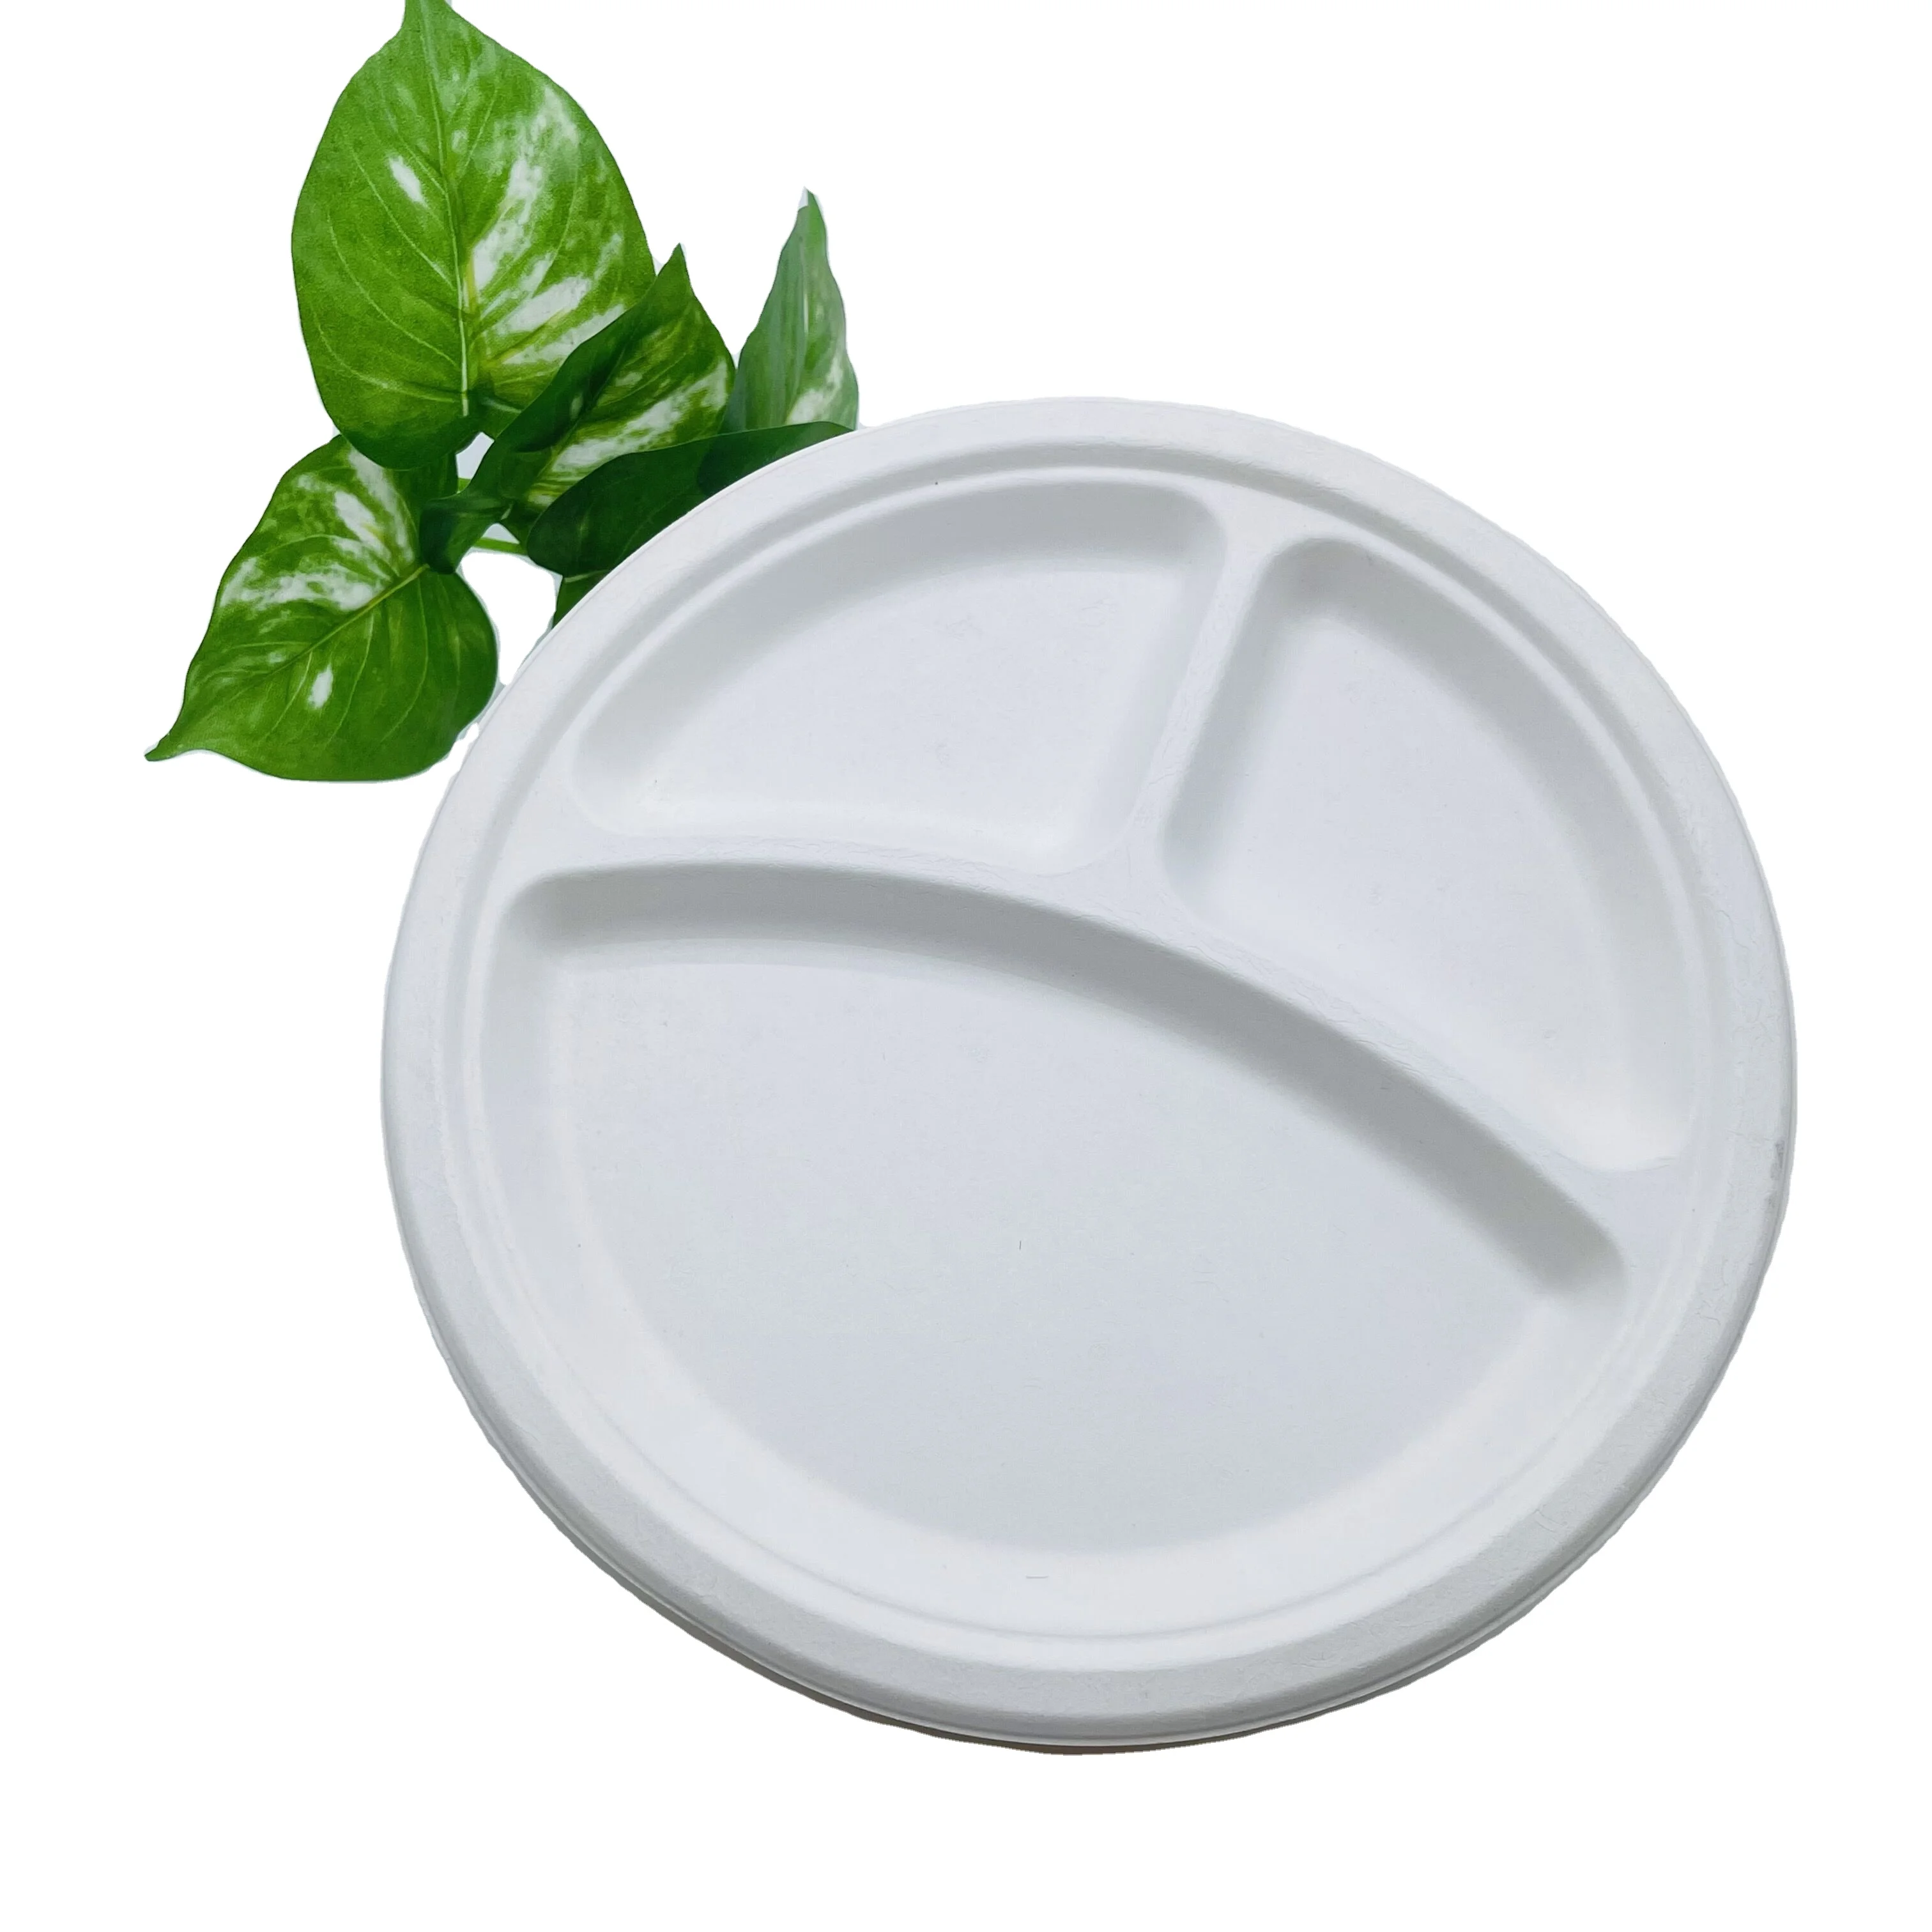 

9 inch Compostable bagasse disposable white round plate sugarcane 3 compartment plates for parties, White or natural